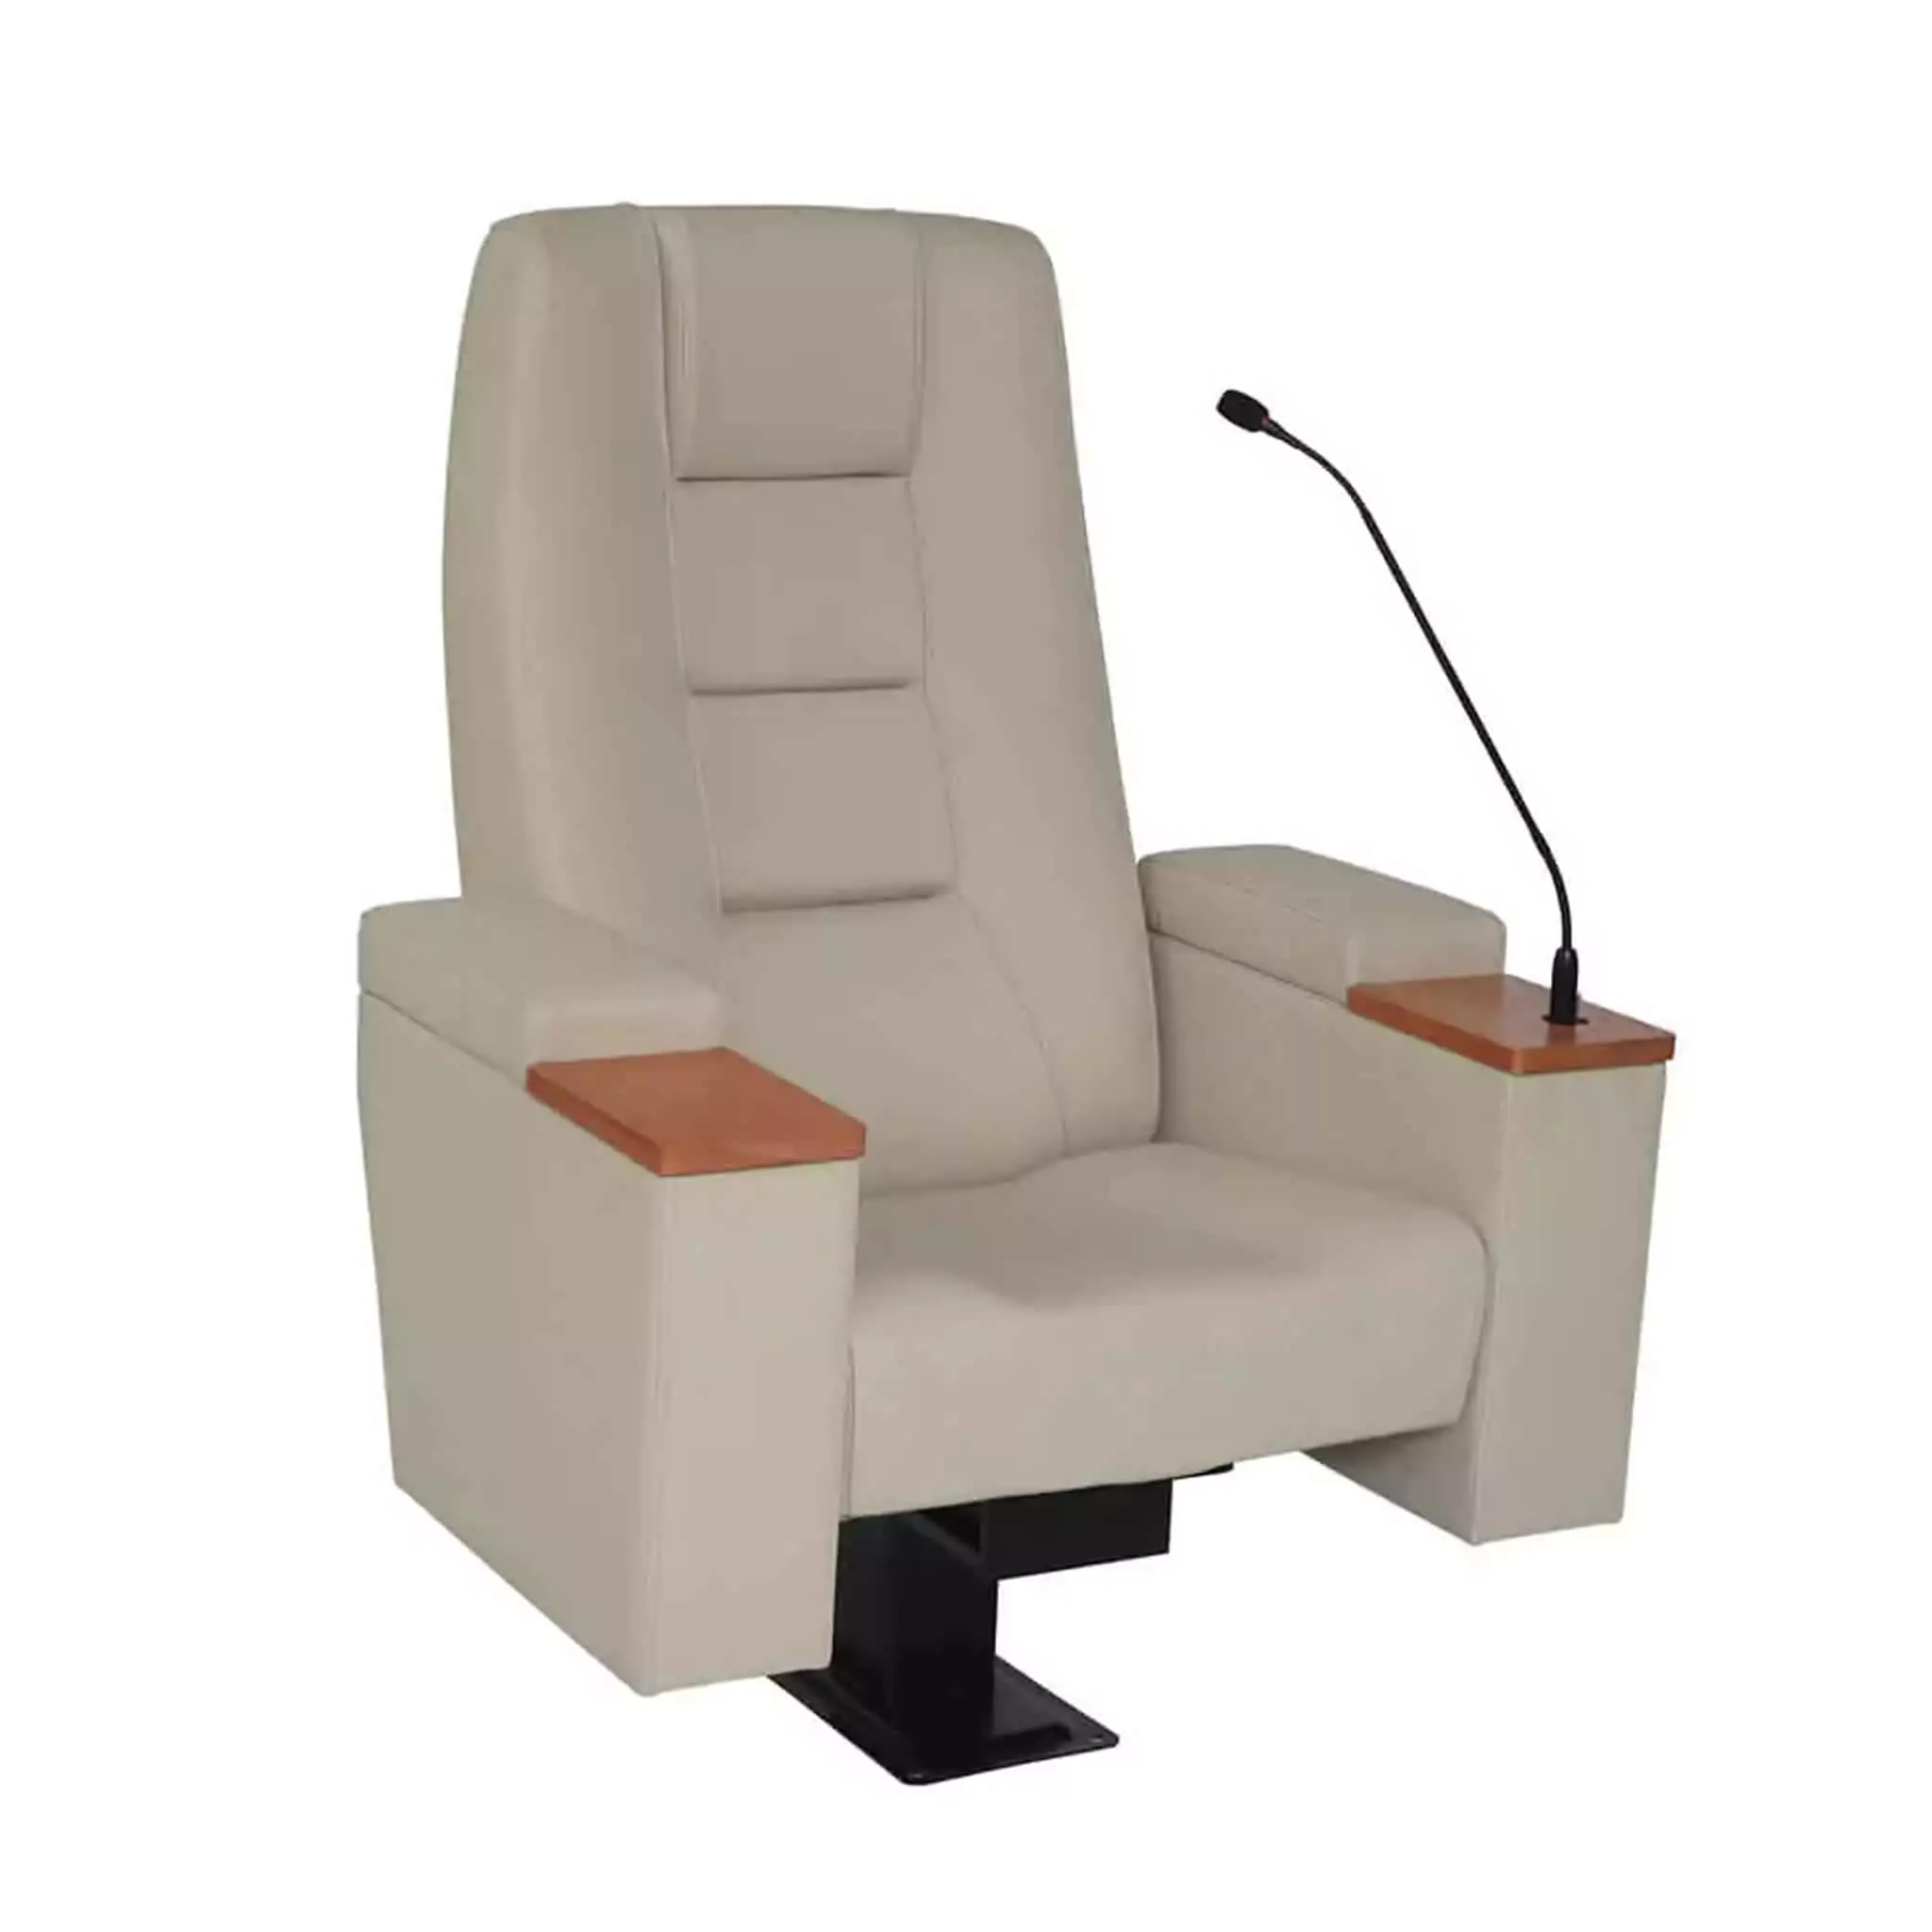 Simko Seating Product Conference Seat Ametist